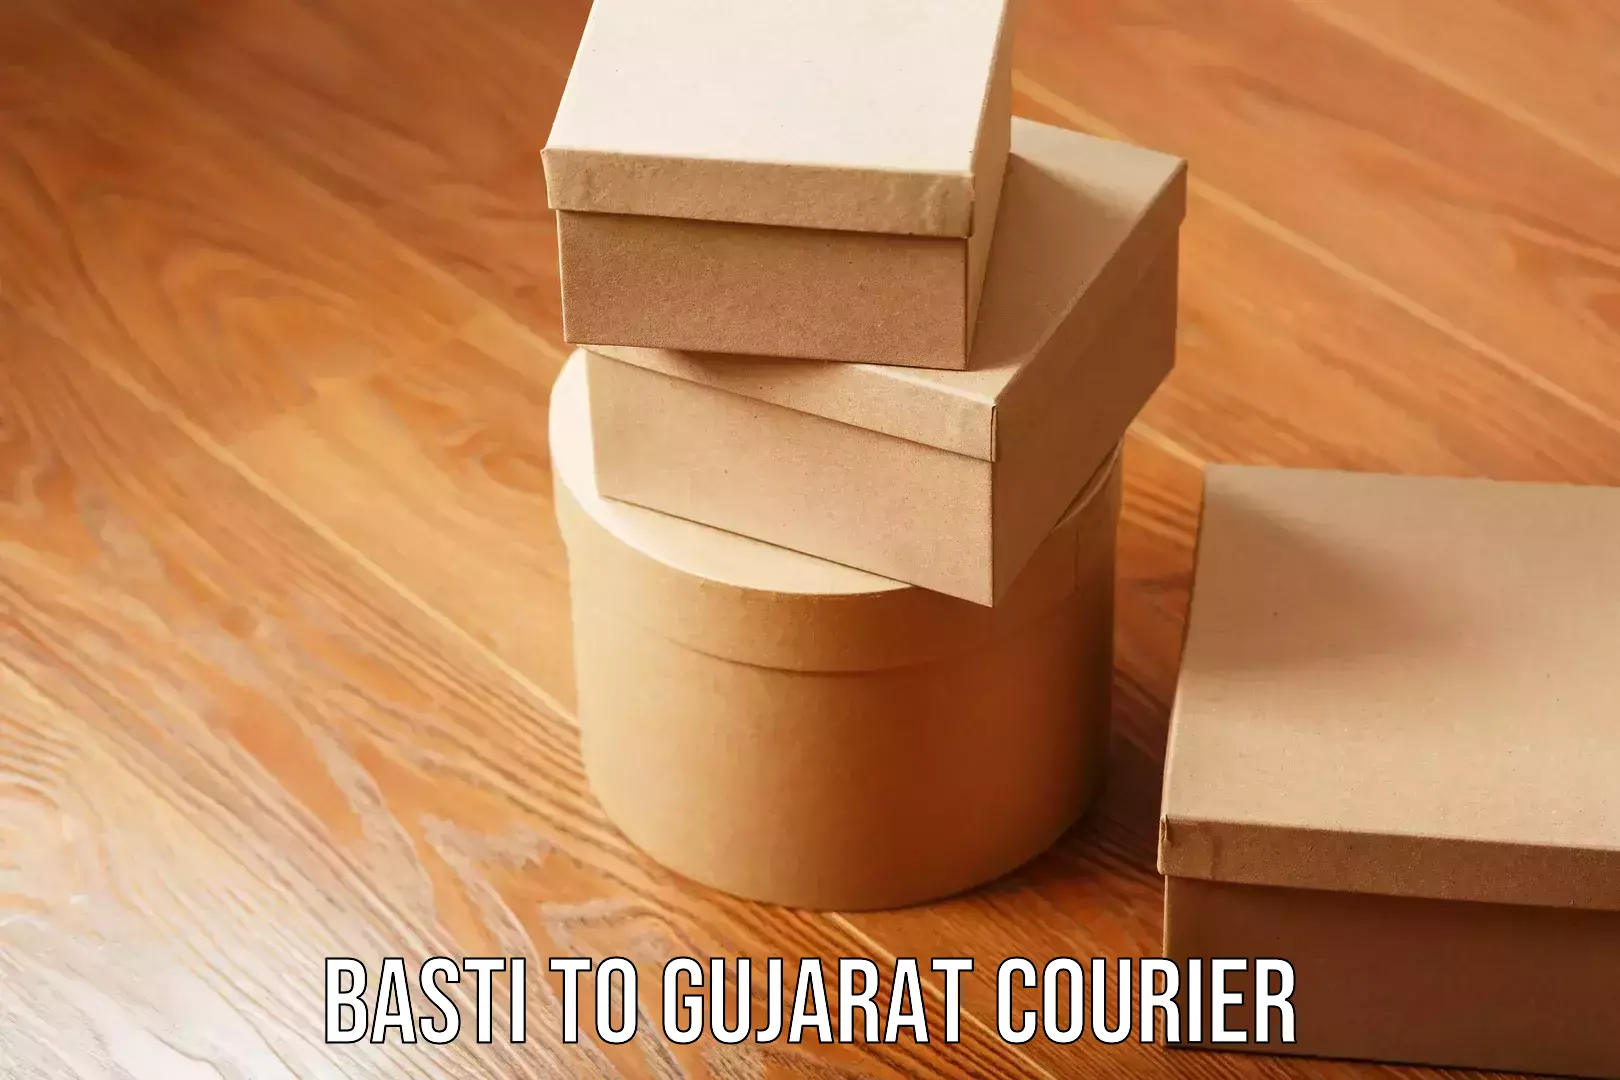 Flexible delivery schedules Basti to Gujarat